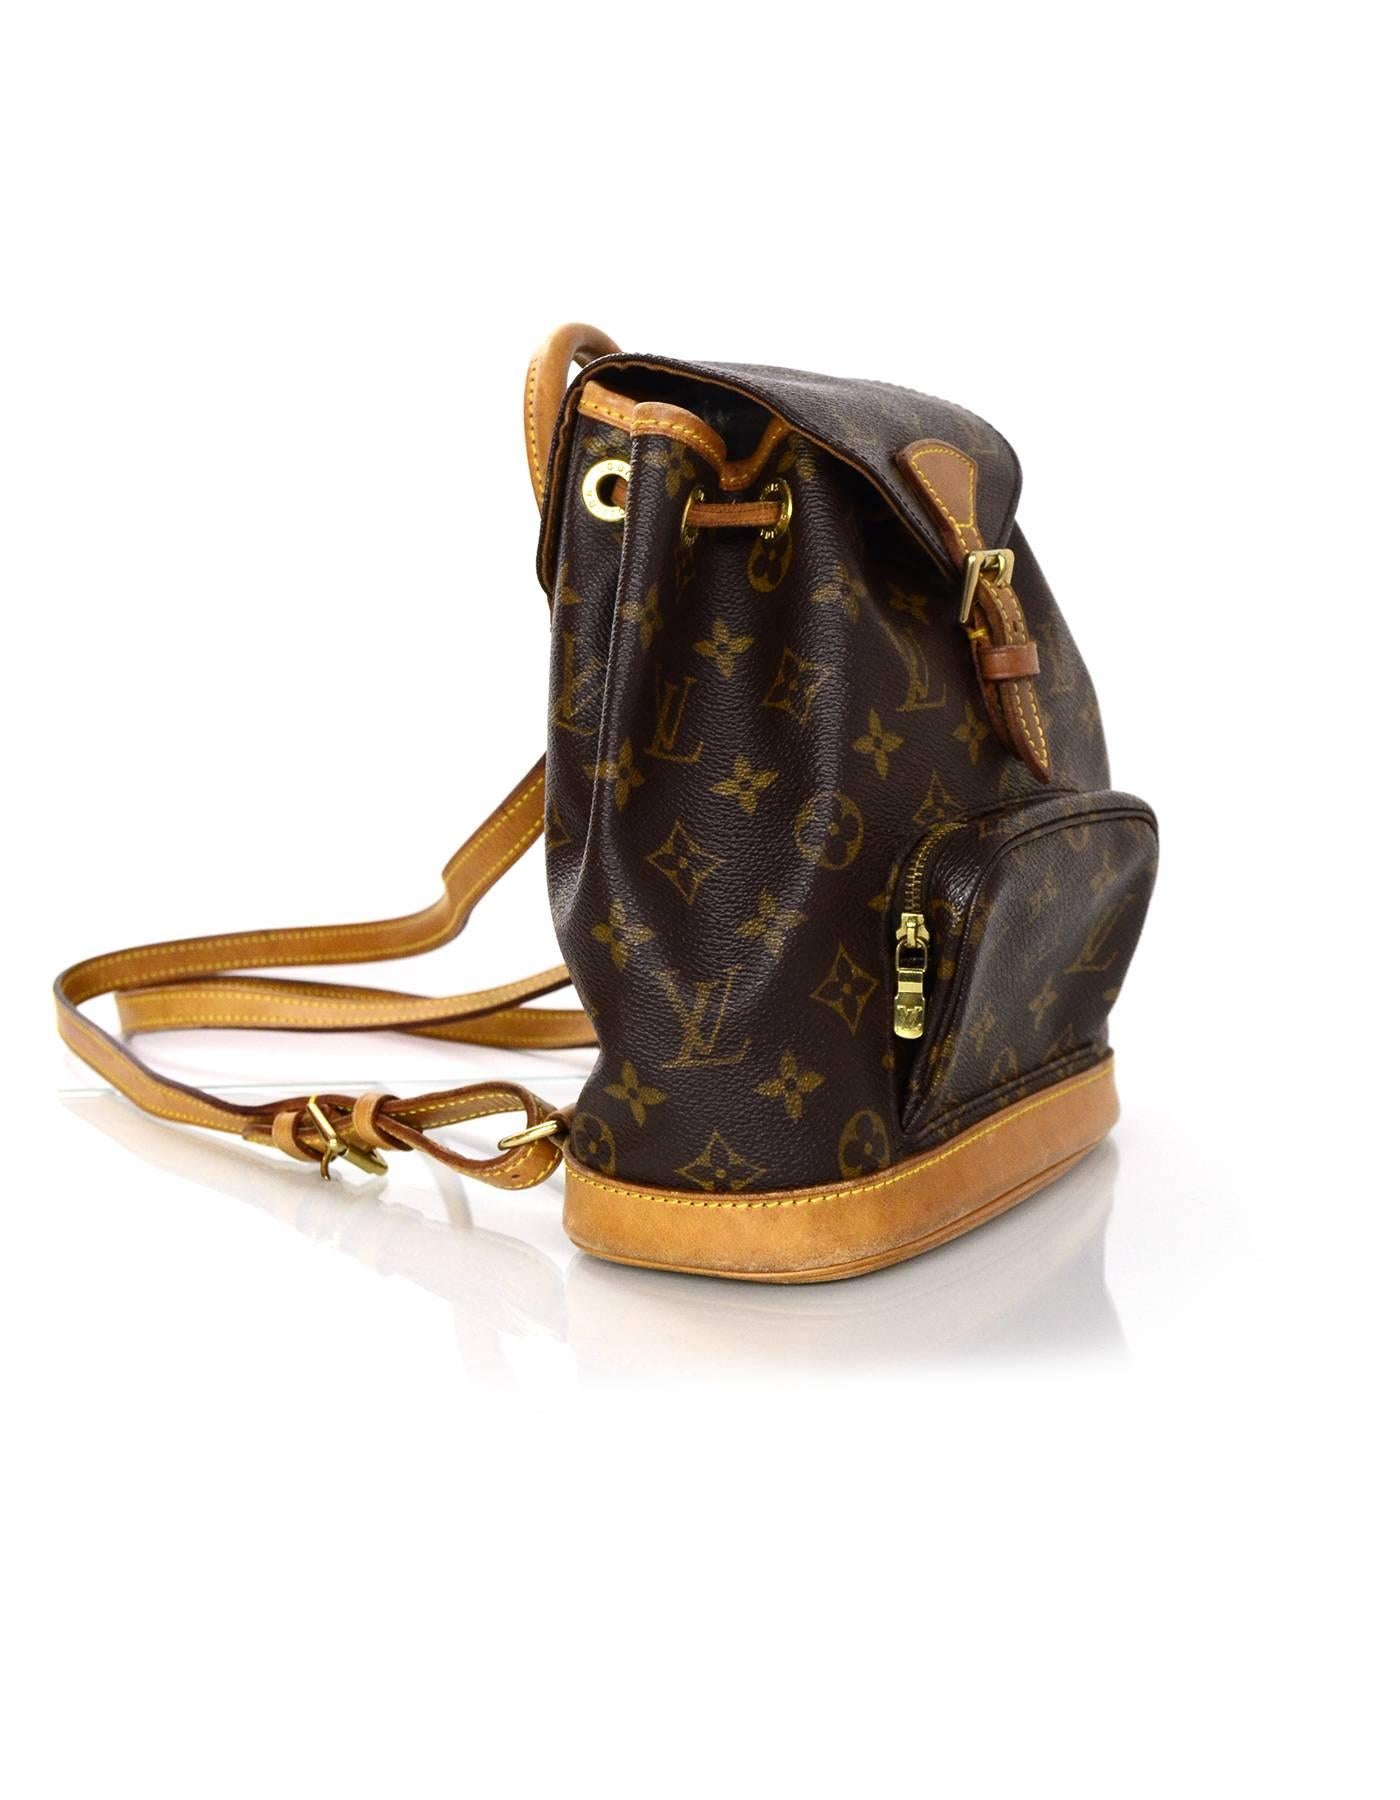 Louis Vuitton Monogram Mini Montsouris Backpack
Features leather trim throughout and adjustable shoulder straps

Made In: France
Year of Production: 1997
Color: Brown
Hardware: Goldtone
Materials: Leather and coated canvas
Lining: Brown